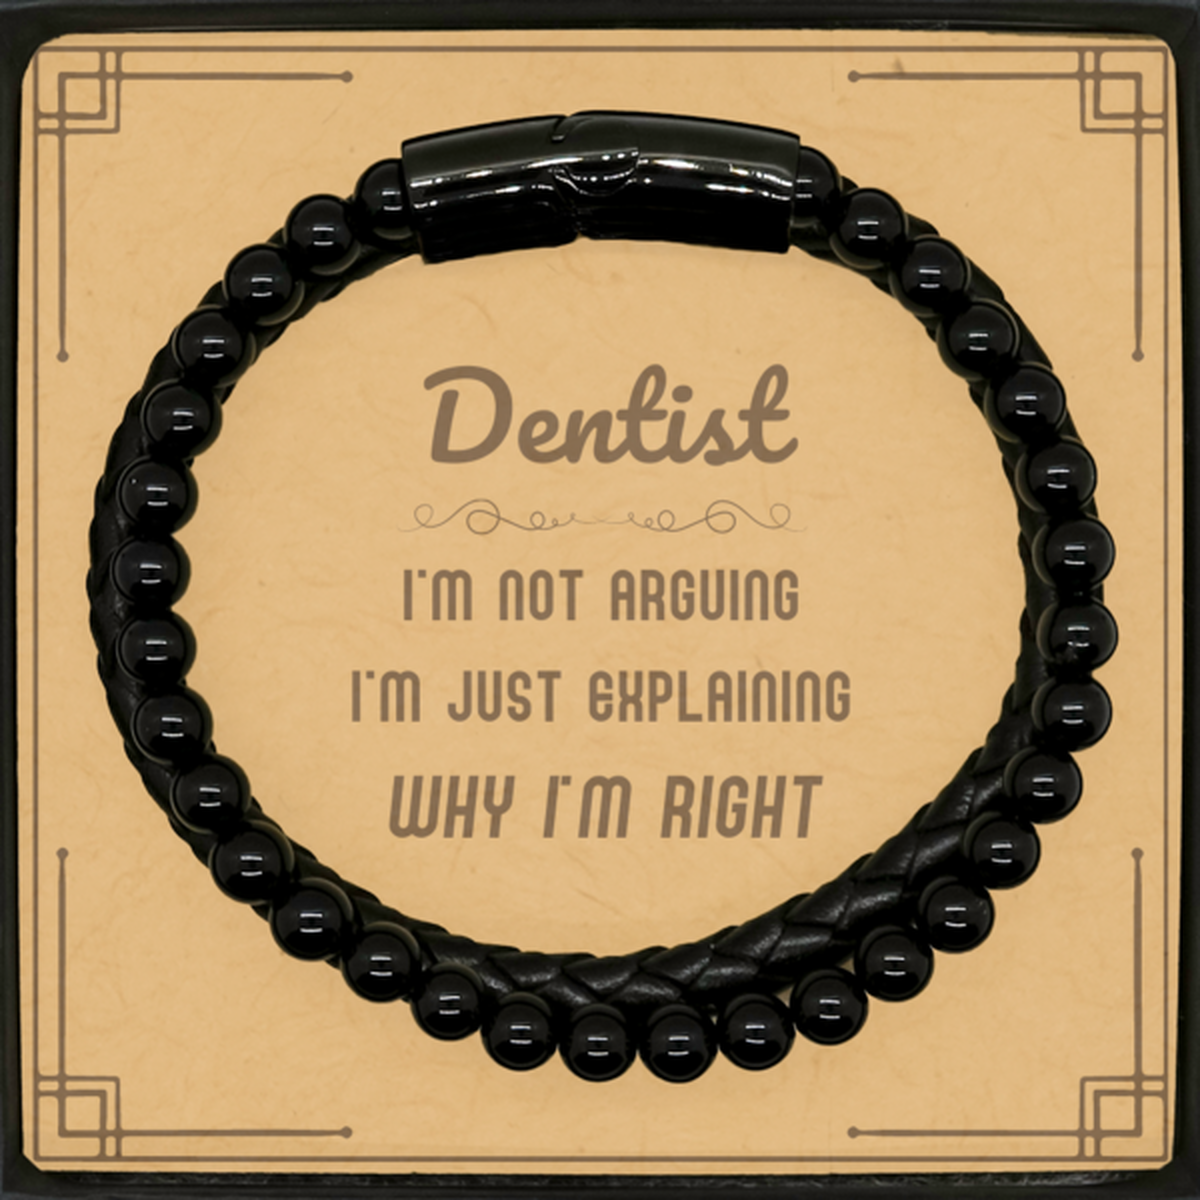 Dentist I'm not Arguing. I'm Just Explaining Why I'm RIGHT Stone Leather Bracelets, Funny Saying Quote Dentist Gifts For Dentist Message Card Graduation Birthday Christmas Gifts for Men Women Coworker